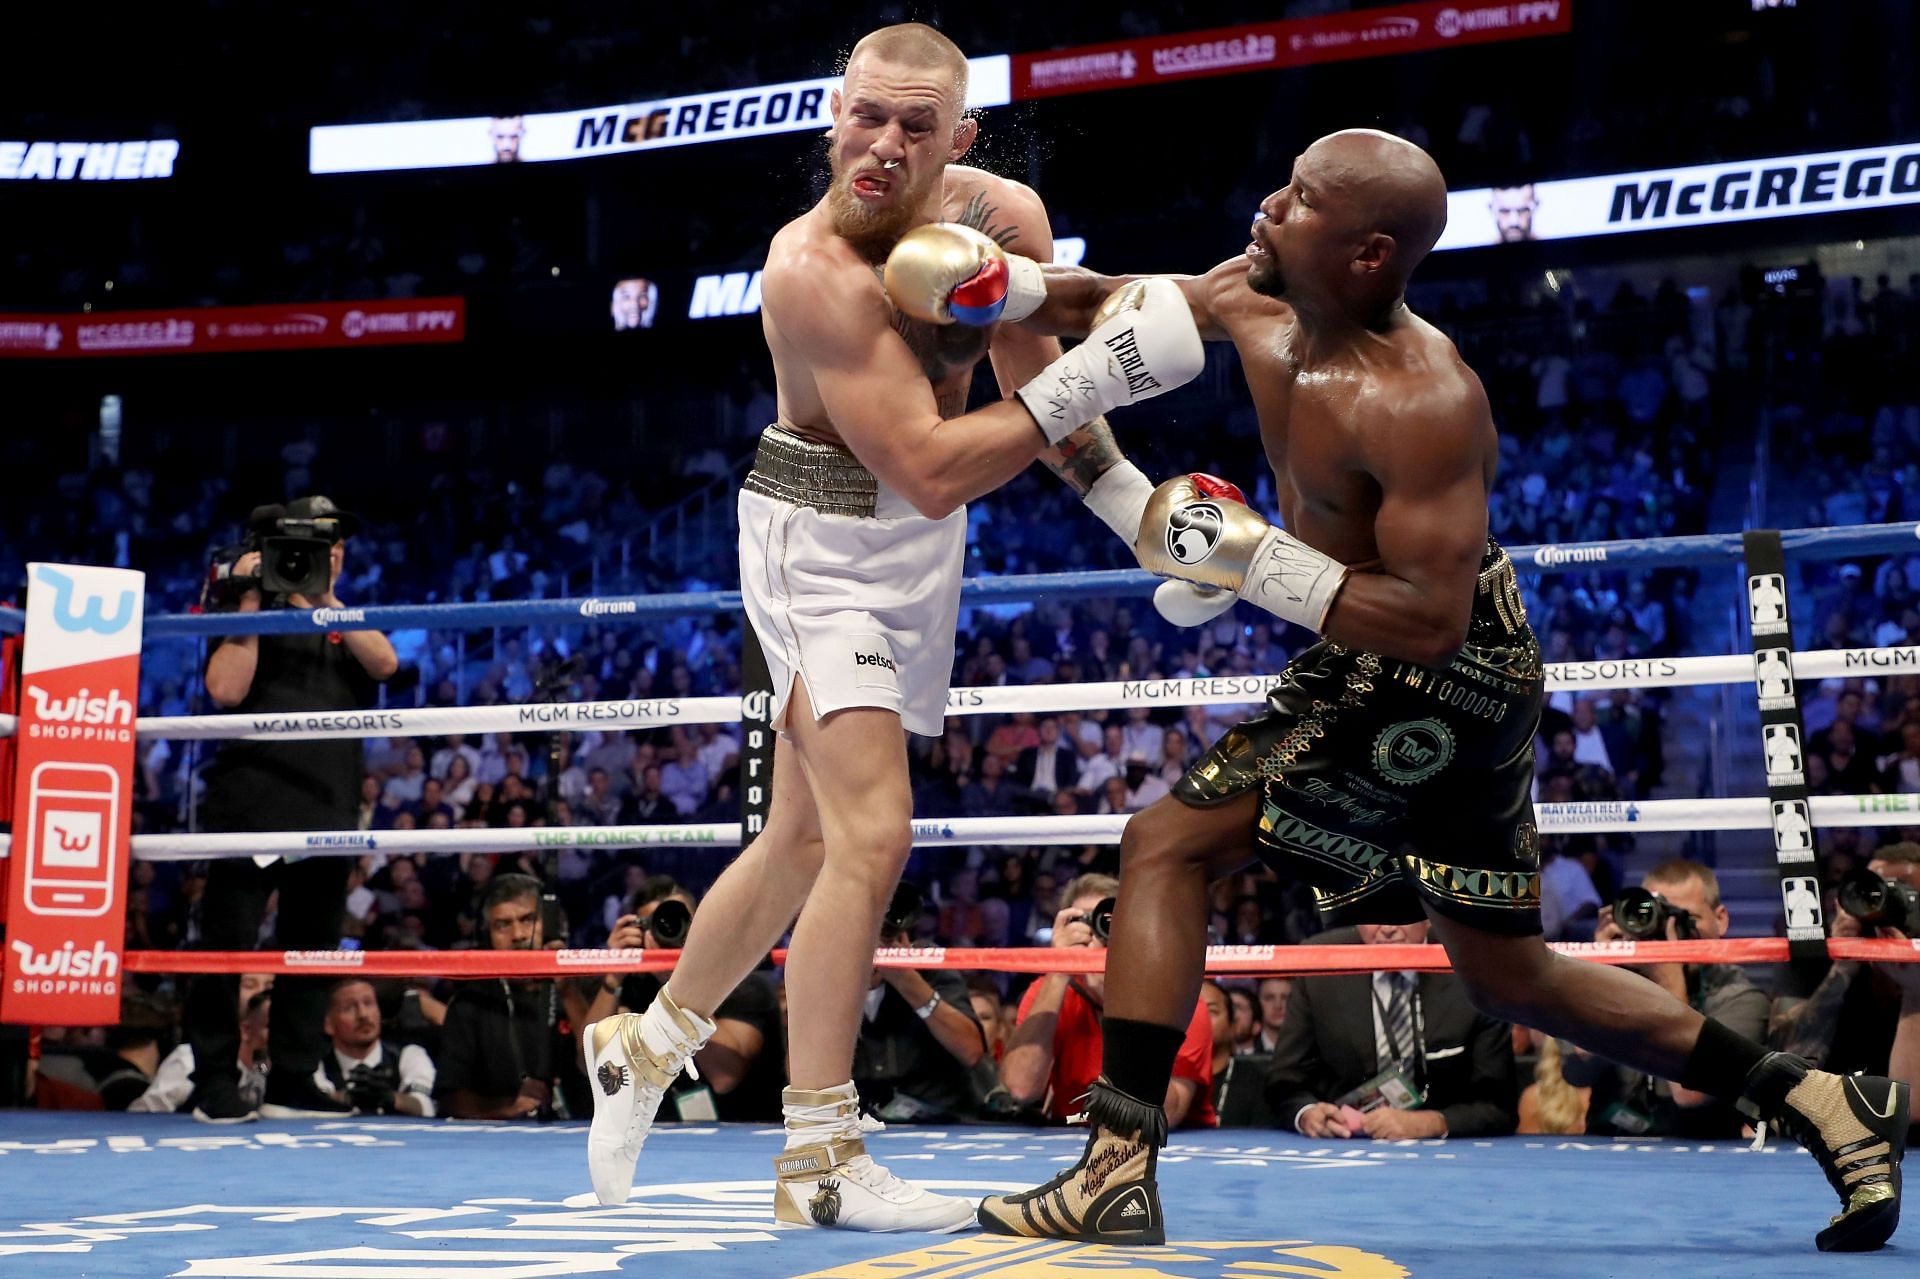 Fights between boxers and MMA fighters have become more common since McGregor vs. Mayweather